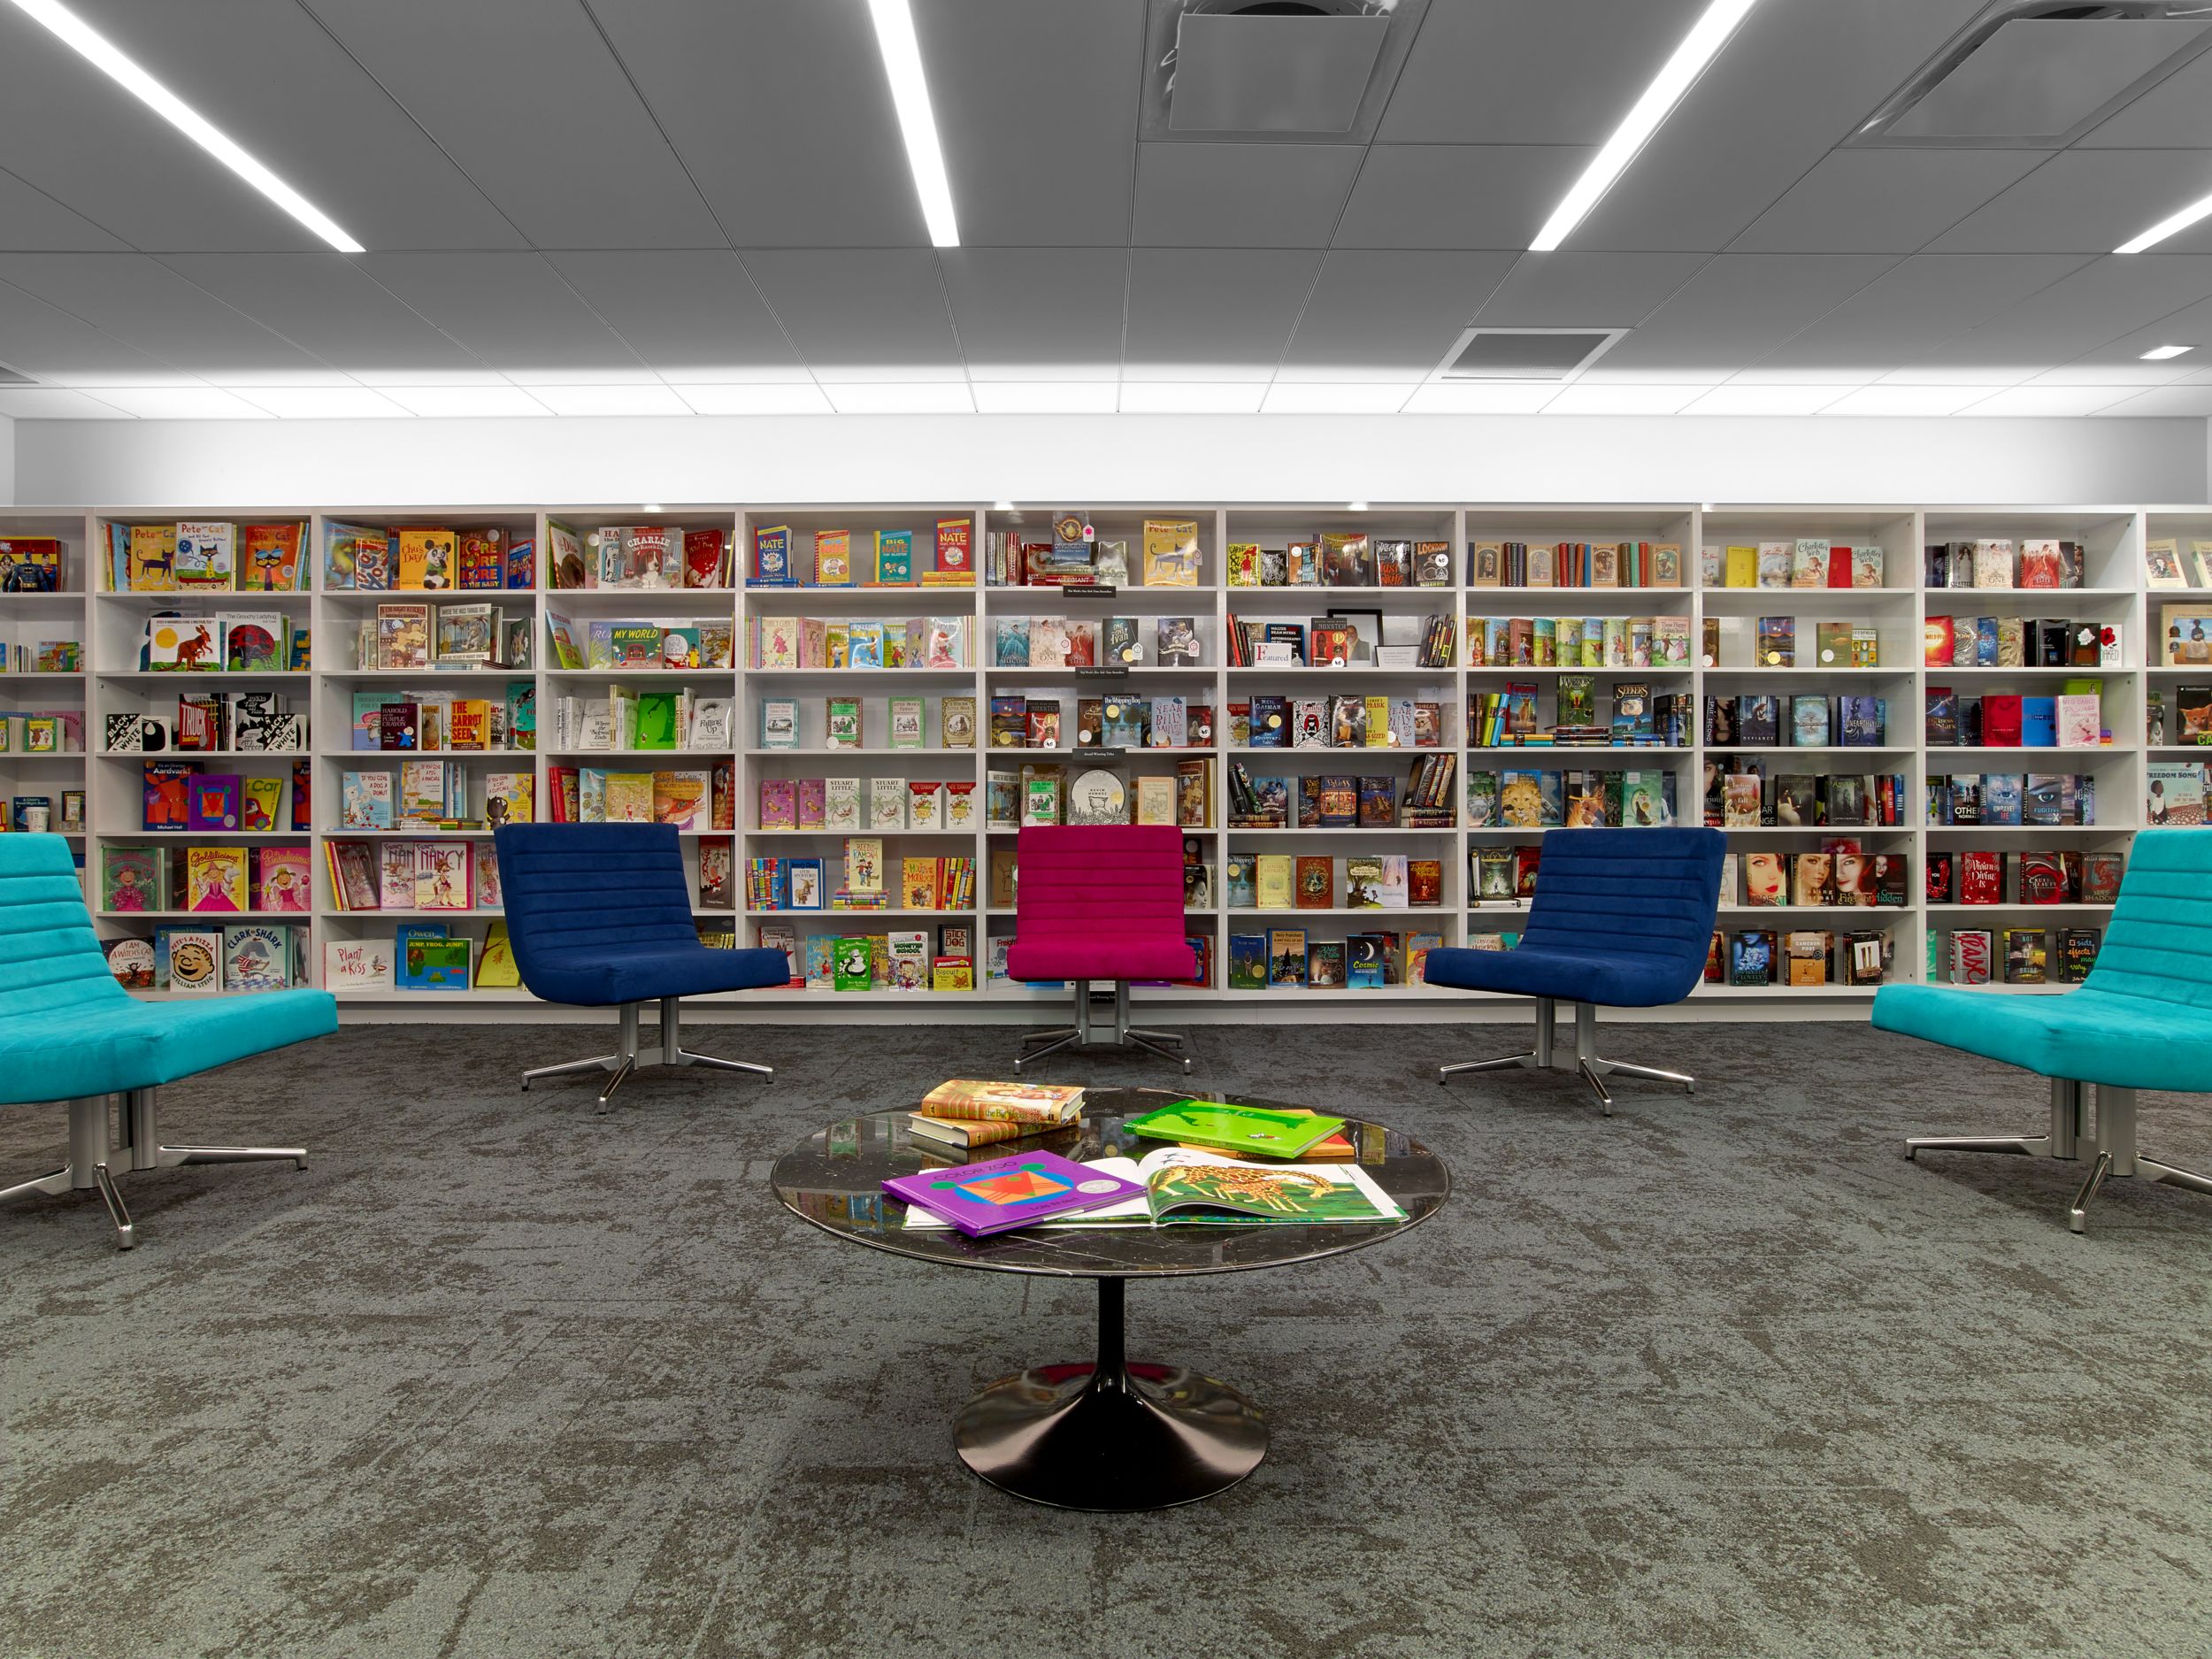 Interface B603 carpet tile in area with bookshelves and colorful chairs Bildnummer 3